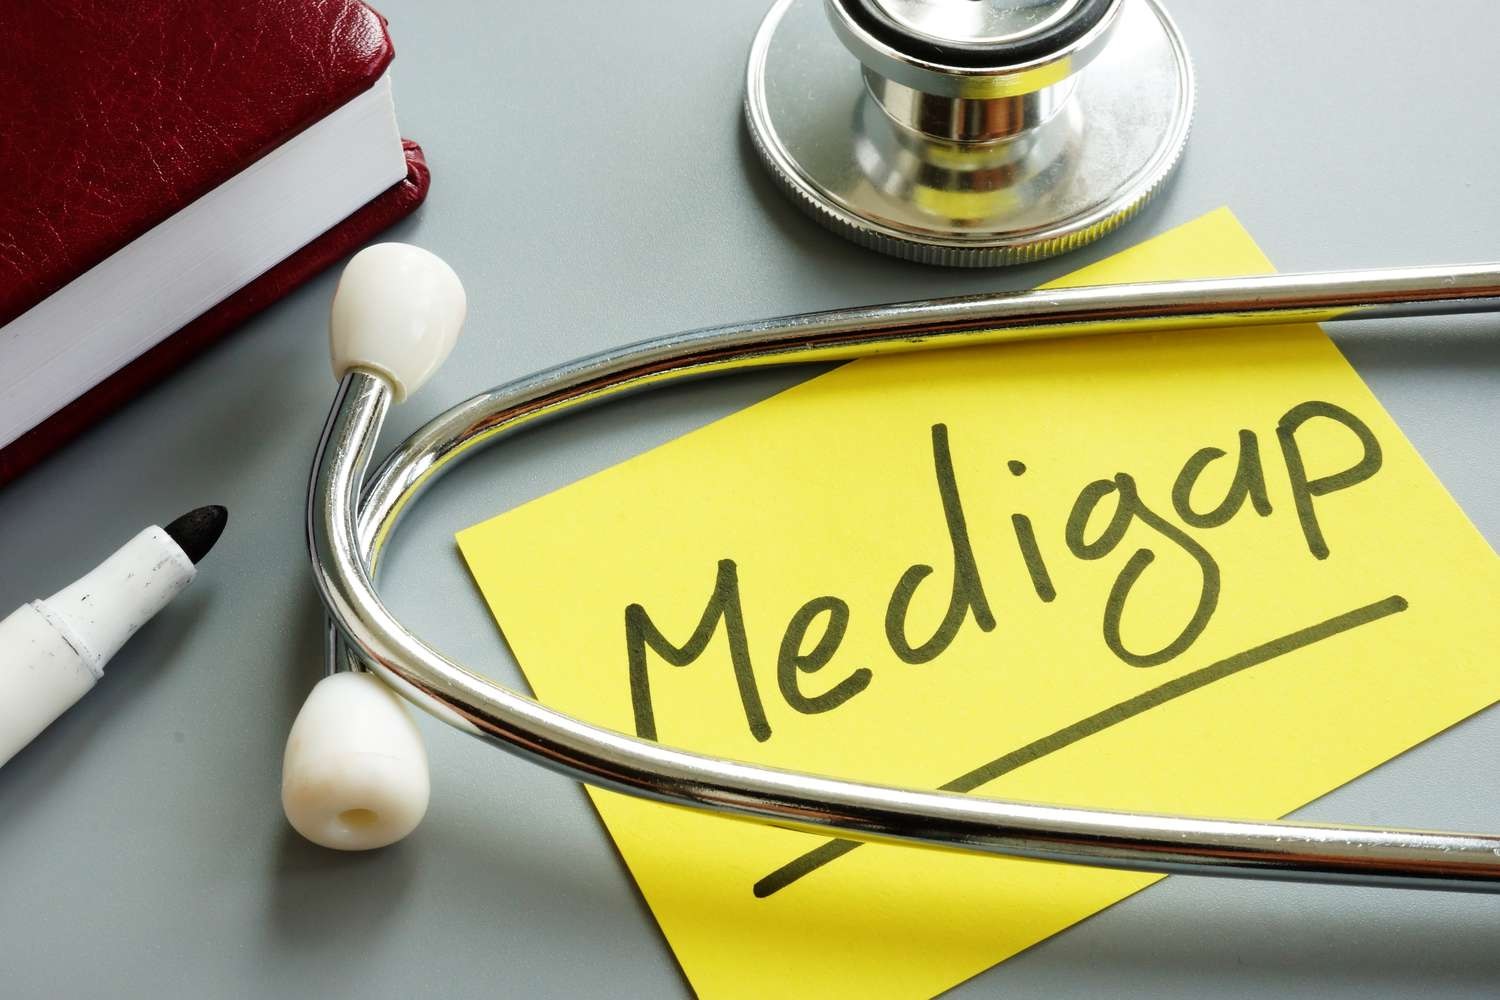 Medicare Supplement Insurance: What It Is, How It Works